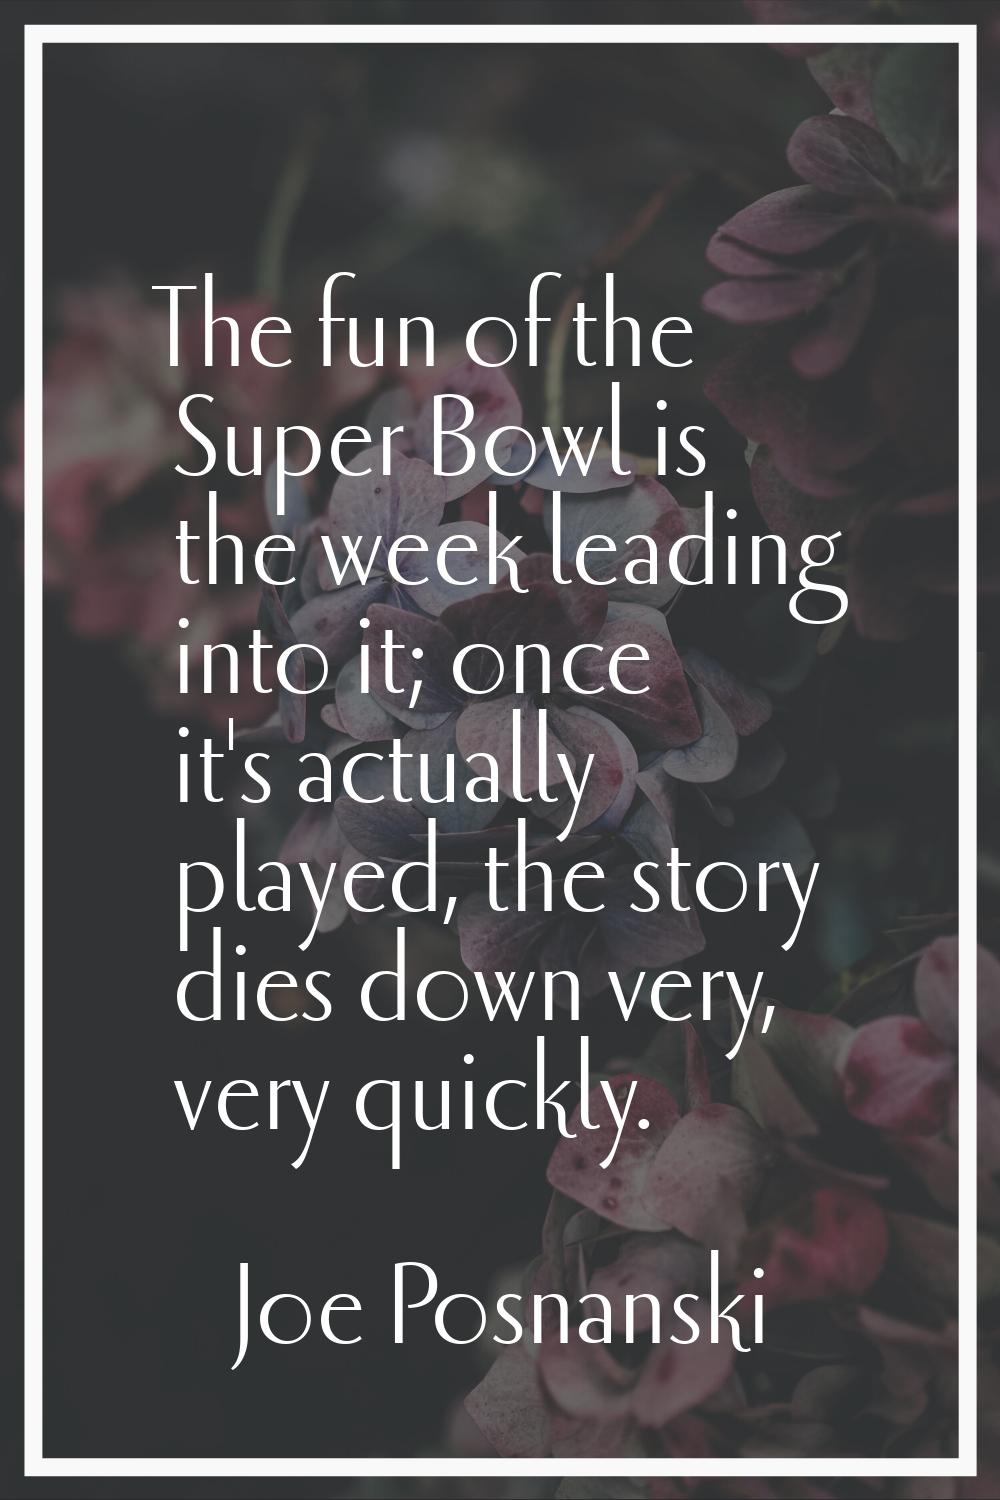 The fun of the Super Bowl is the week leading into it; once it's actually played, the story dies do